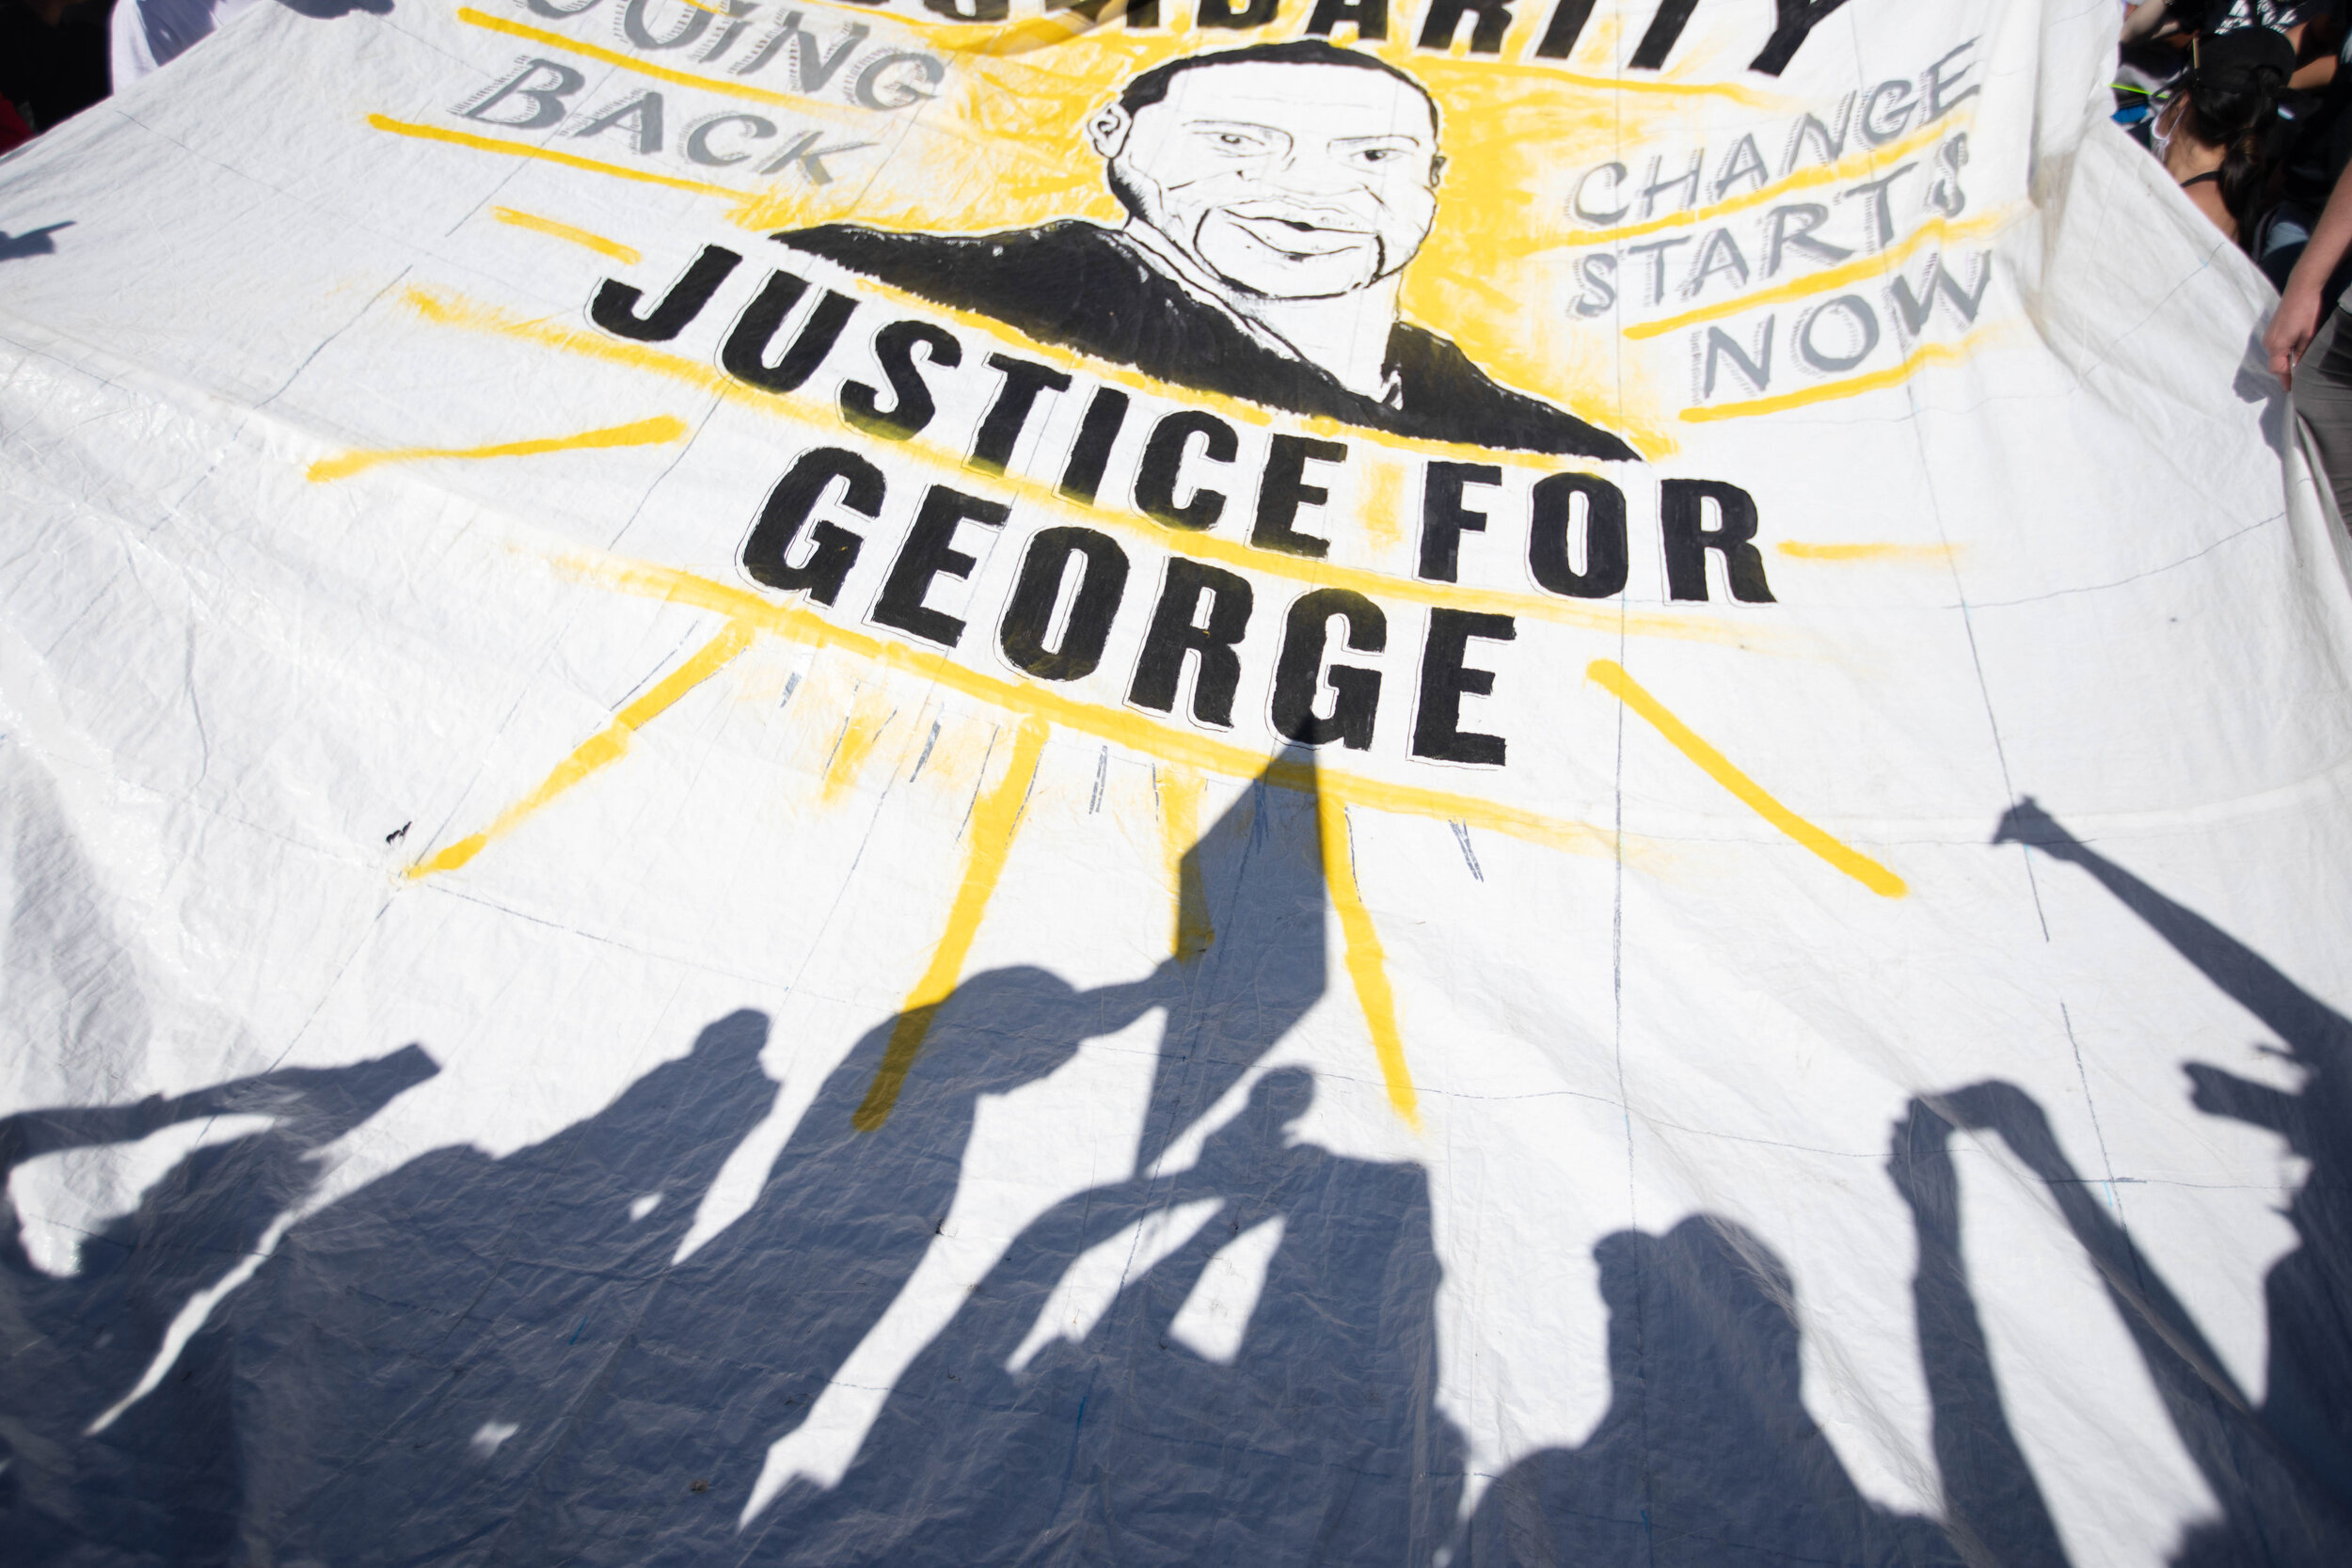  A silhouette of protesters is projected on a banner from the sun during a protest over the police killing of George Floyd in Minneapolis, Minnesota on May 30, 2020. Chris Juhn/Zuma. 